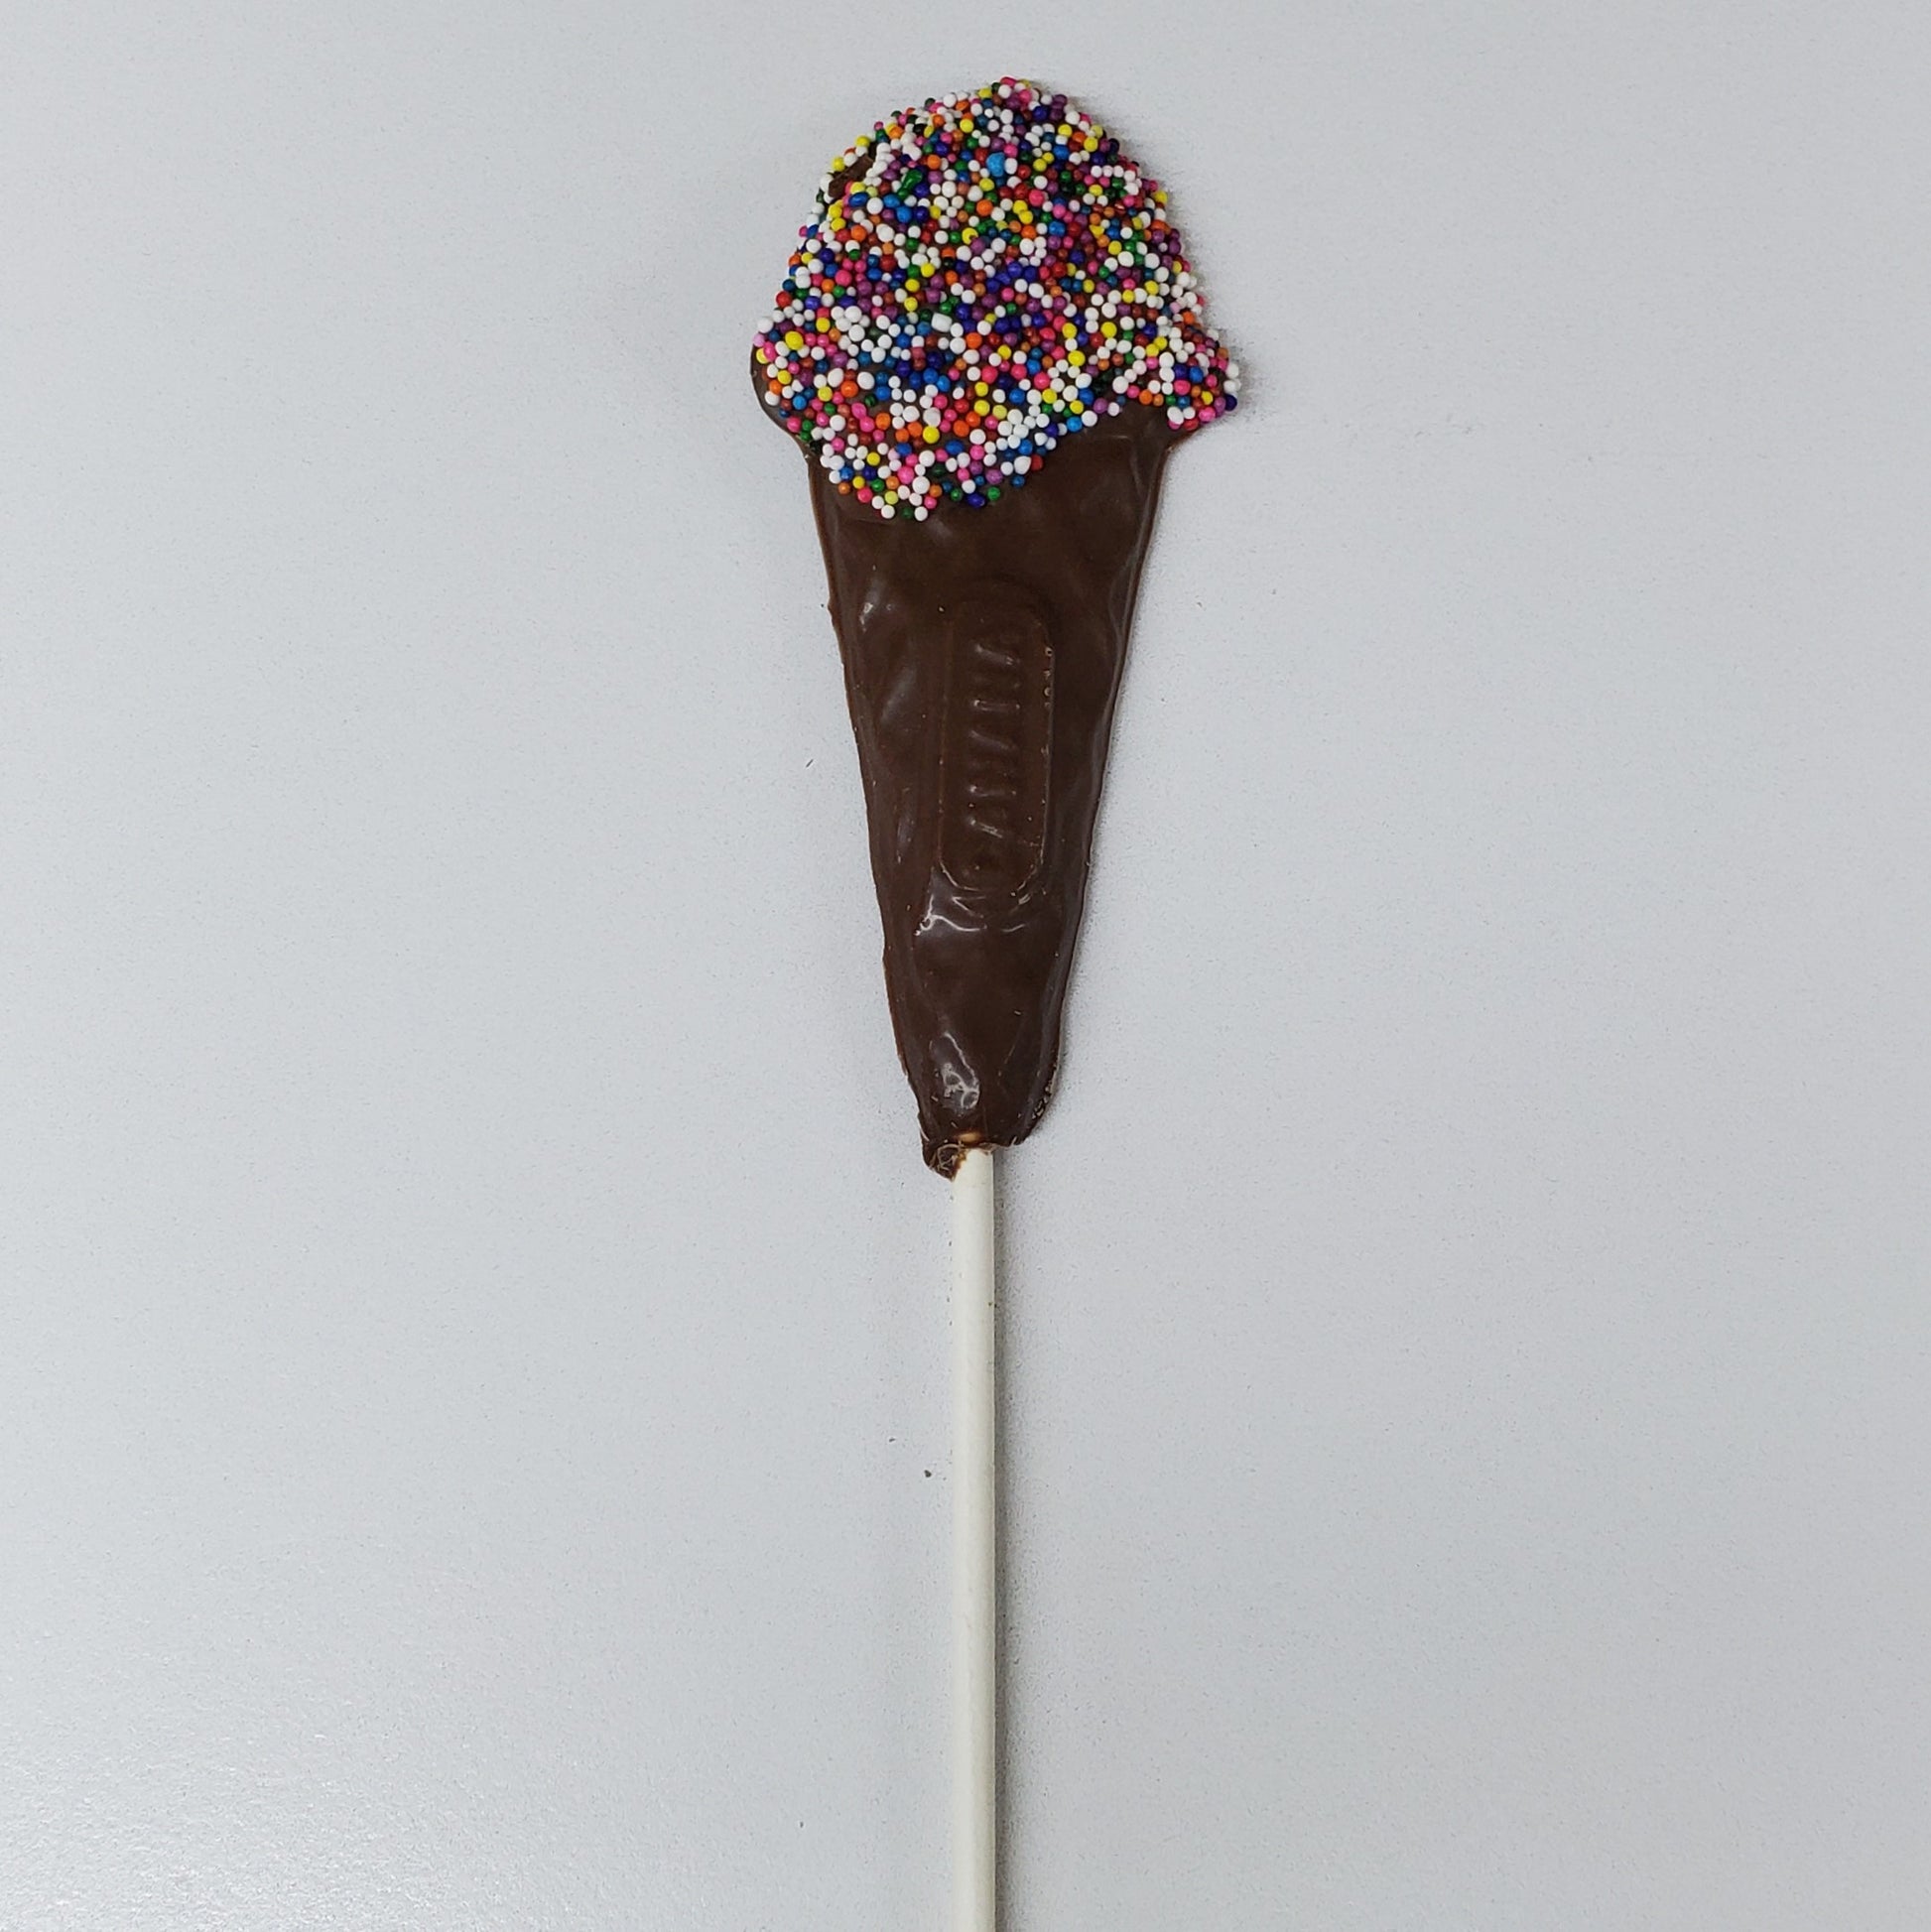 Milk Chocolate shaped into an ice cream cone with rainbow nonpareils